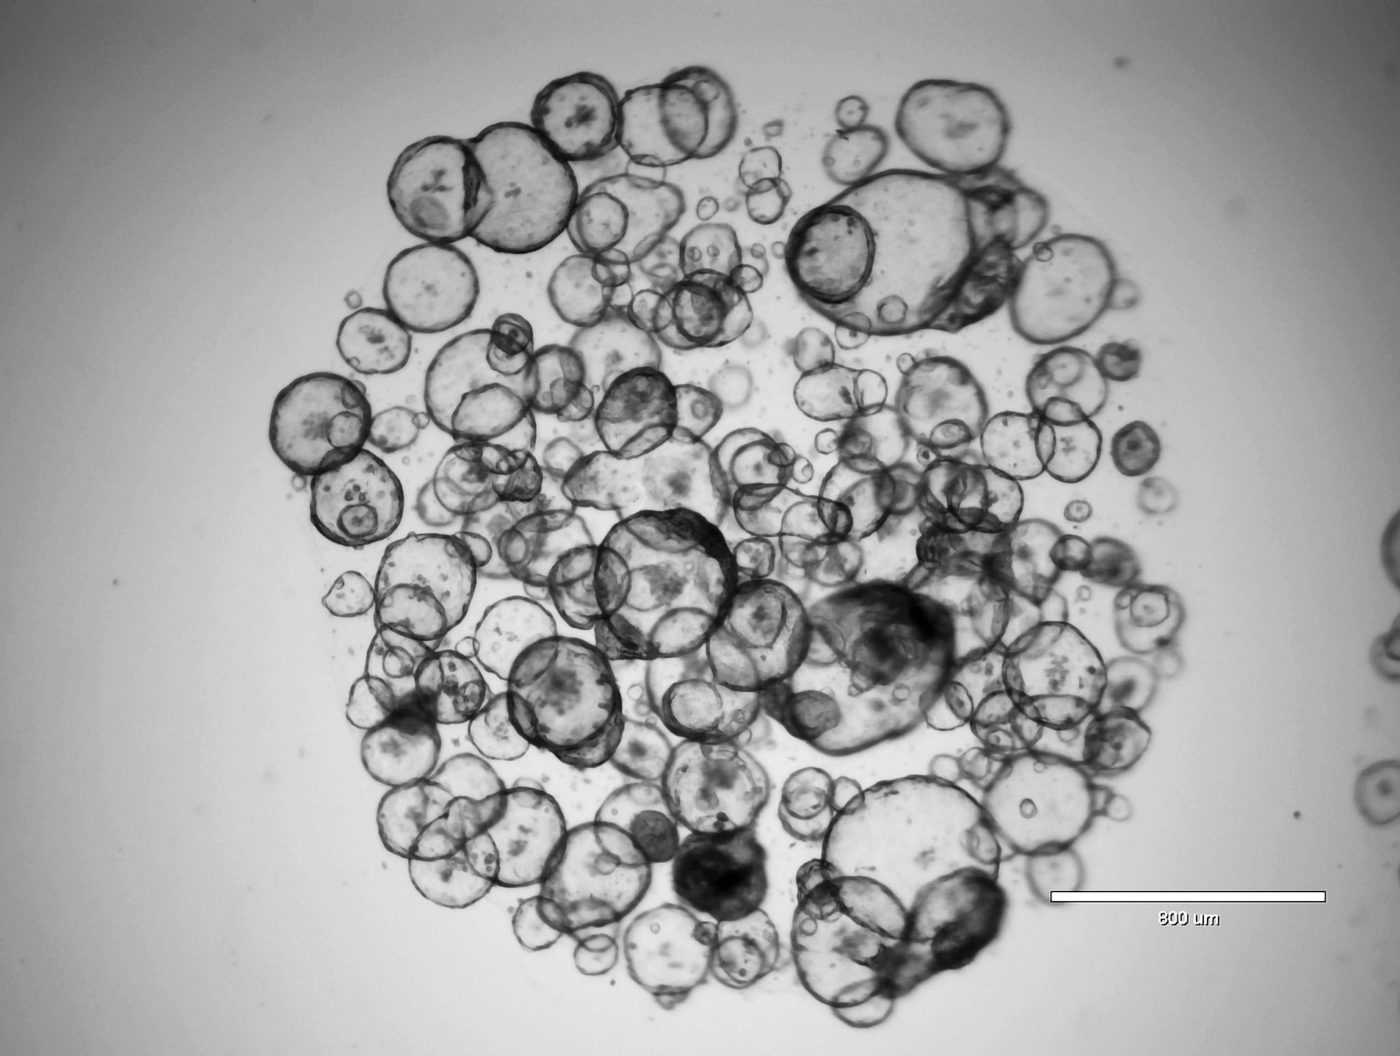 Spheroids, Organoids Replacing Standard Cultures for Cell-Based Assays